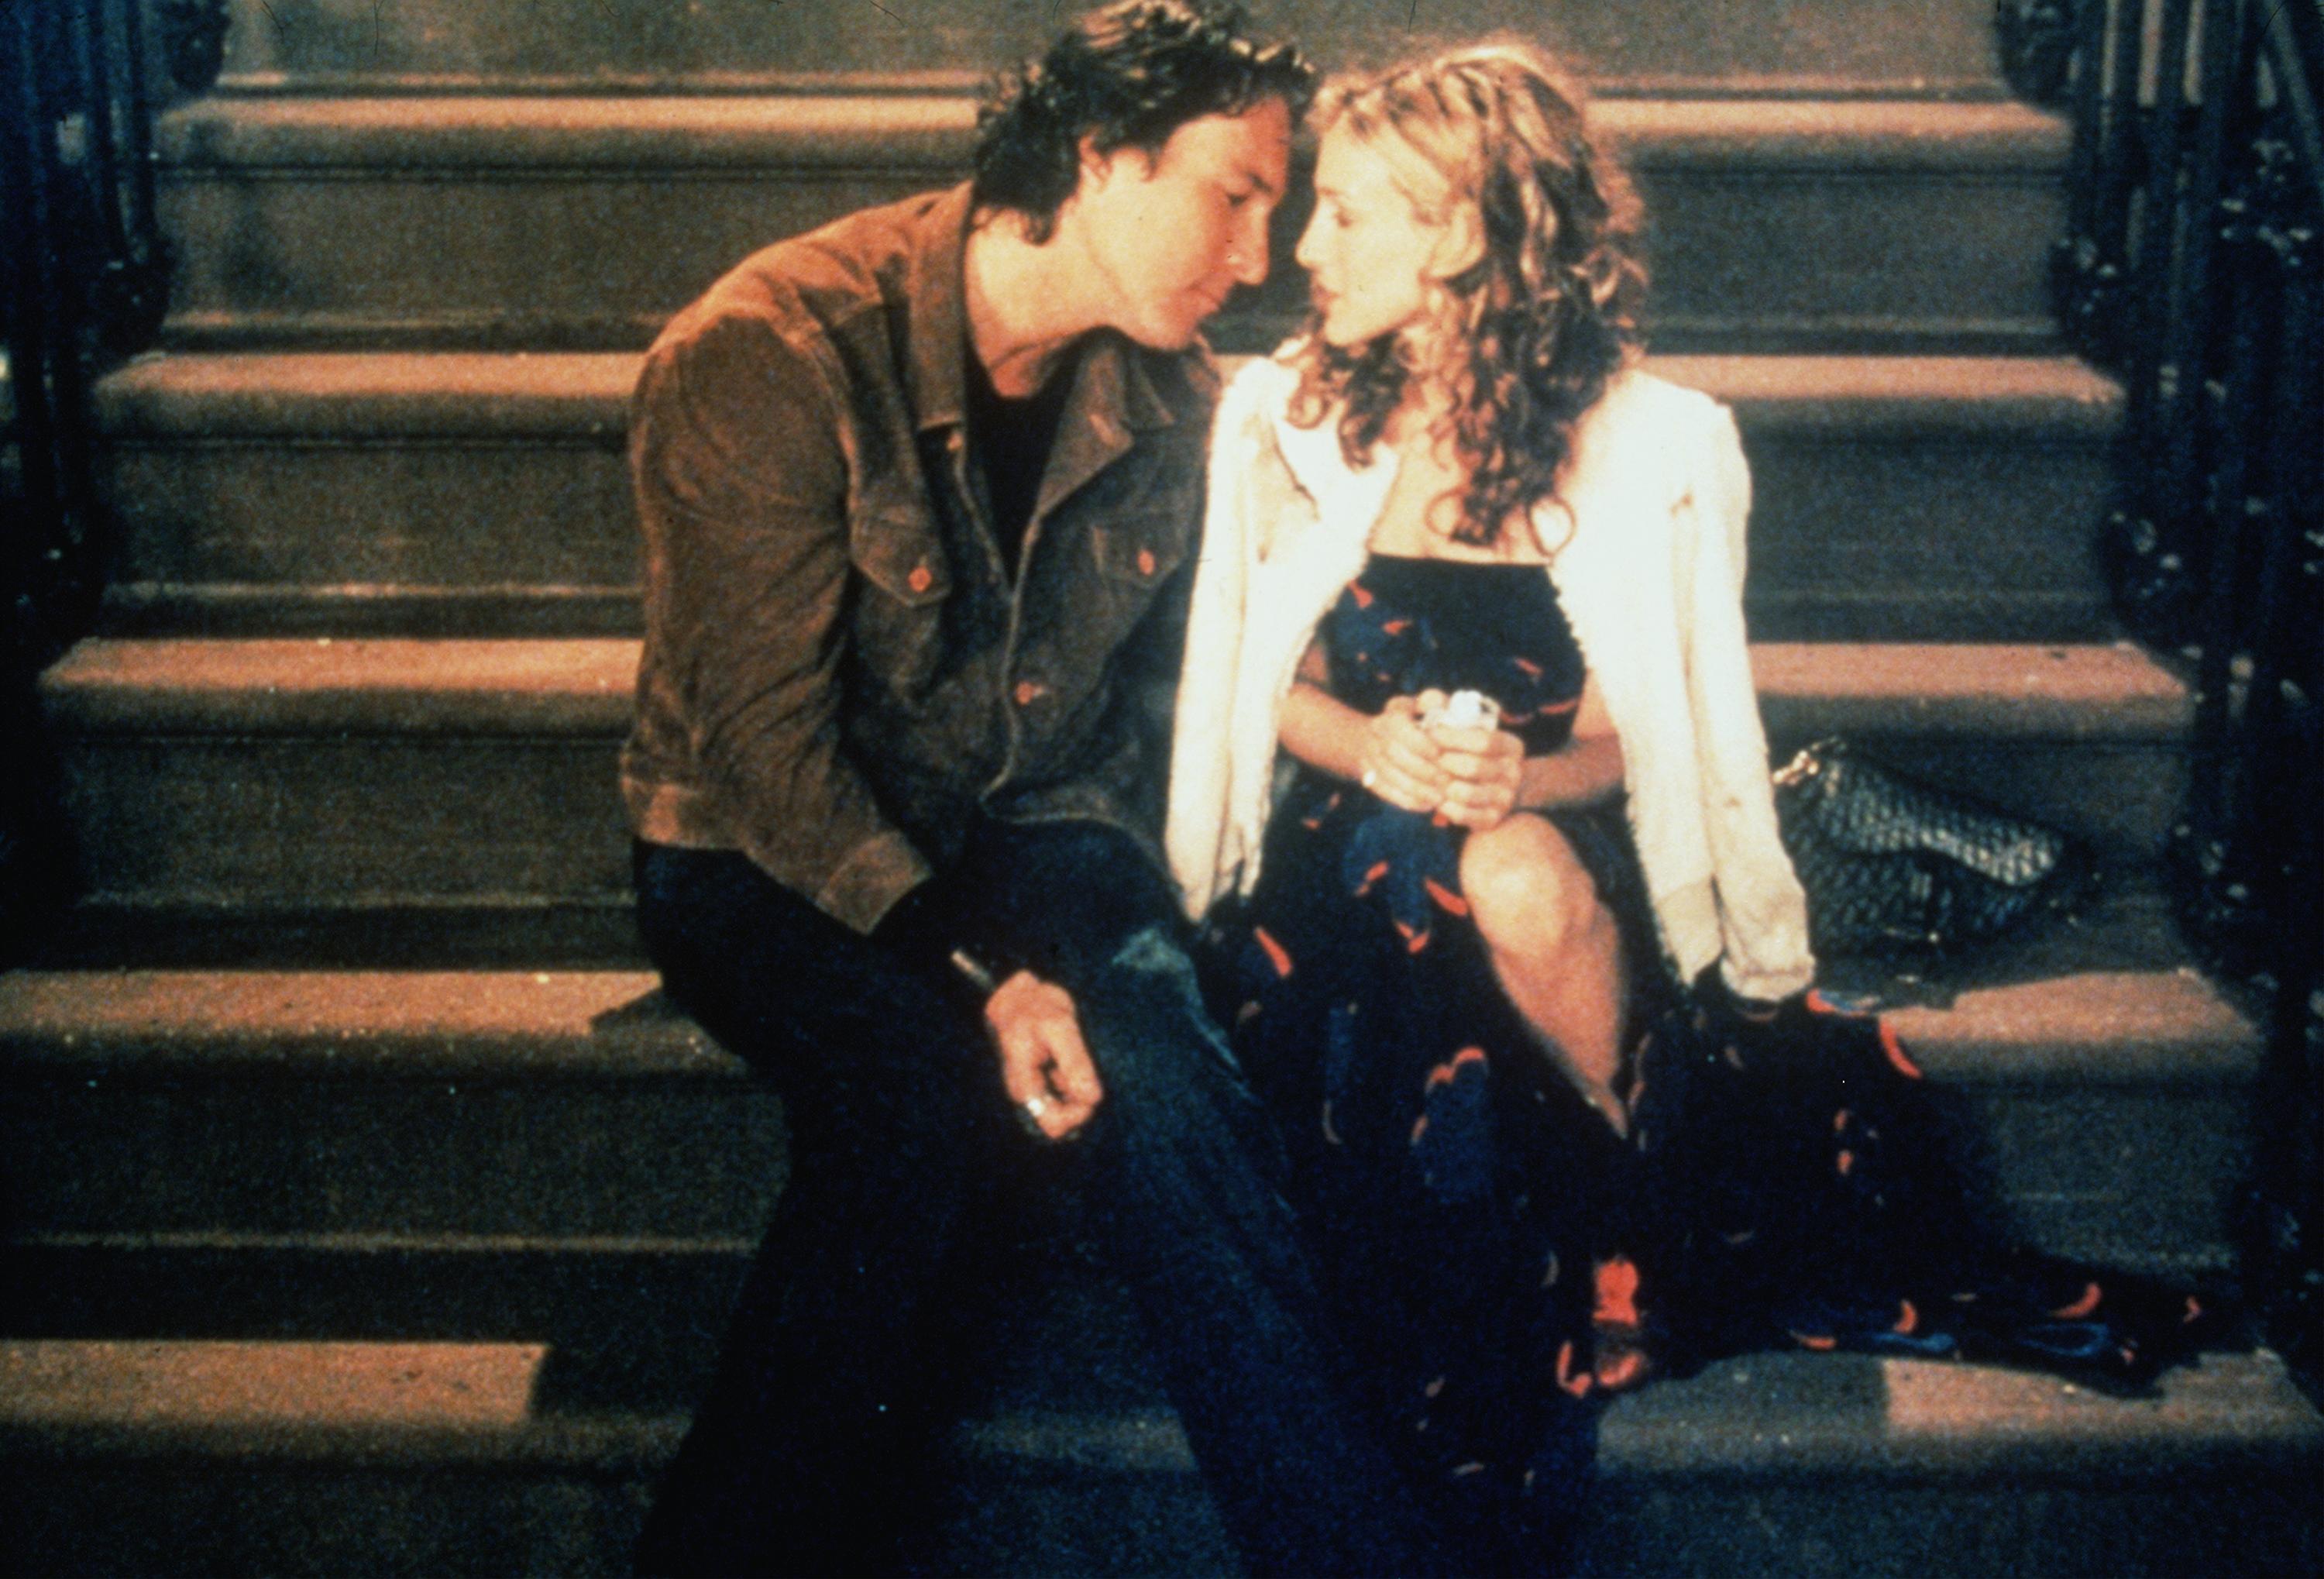 Sarah Jessica Parker (Carrie) and John Corbett (Aidan) sit on Carrie's steps in 'Sex and the City'